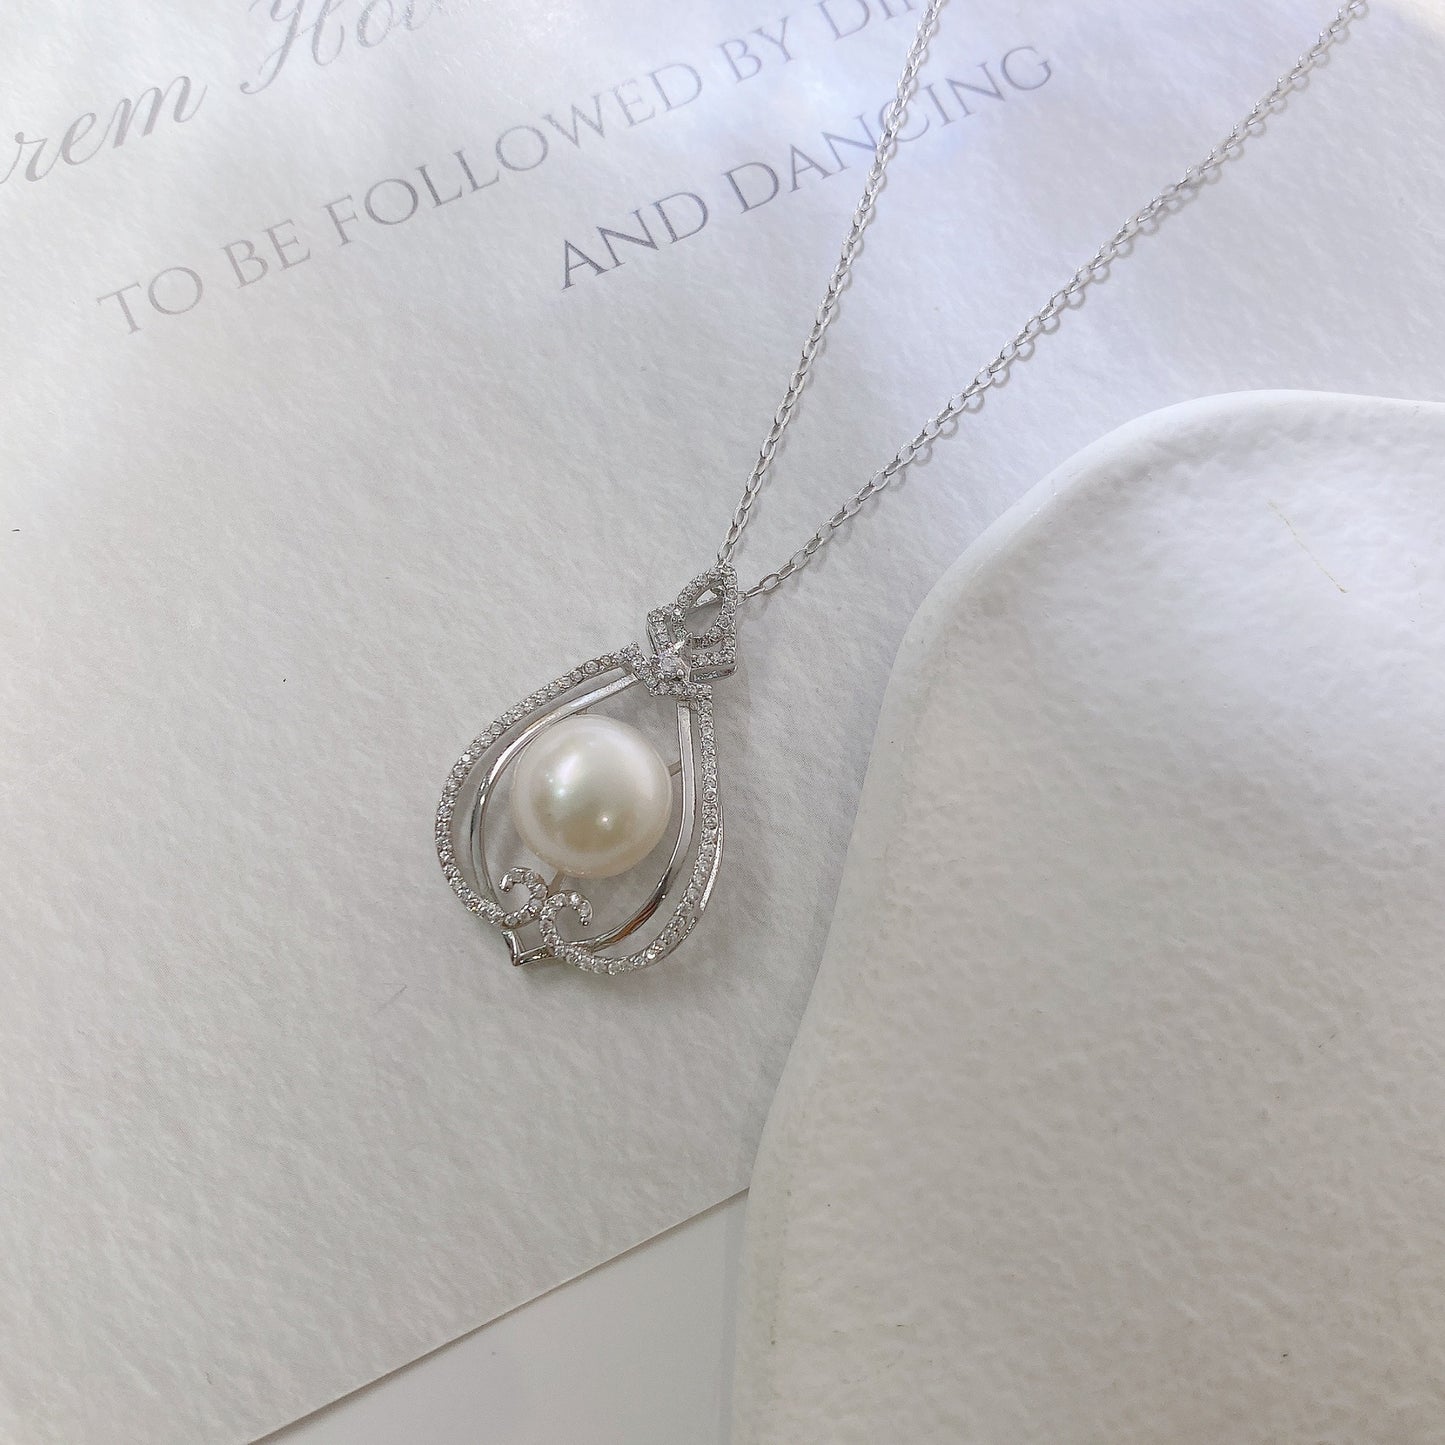 Hollow Pear Drop Shape with Round Natural Pearl Pendant Silver Necklace for Women